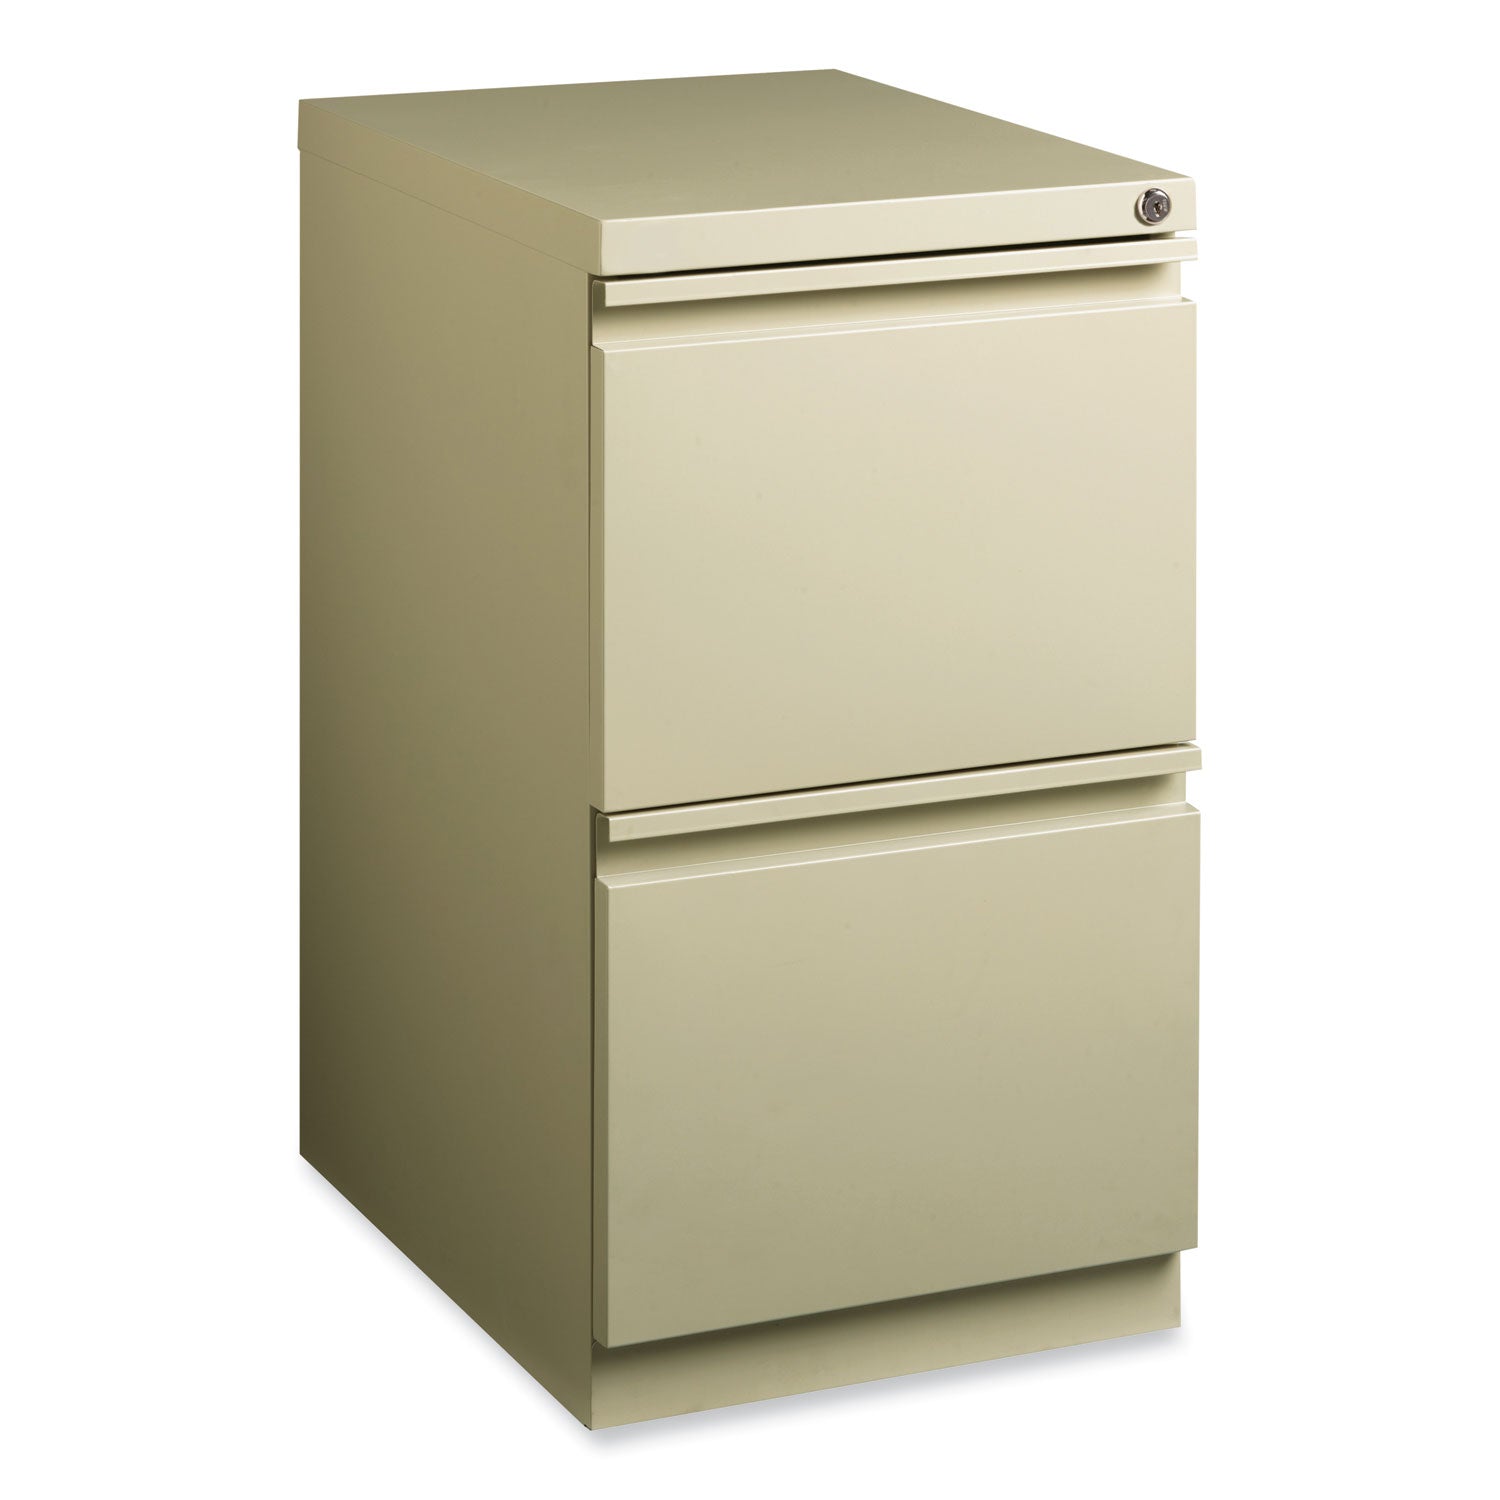 full-width-pull-20-deep-mobile-pedestal-file-2-drawer-file-file-letter-putty-15x1988x2775-ships-in-4-6-business-days_hid18577 - 1